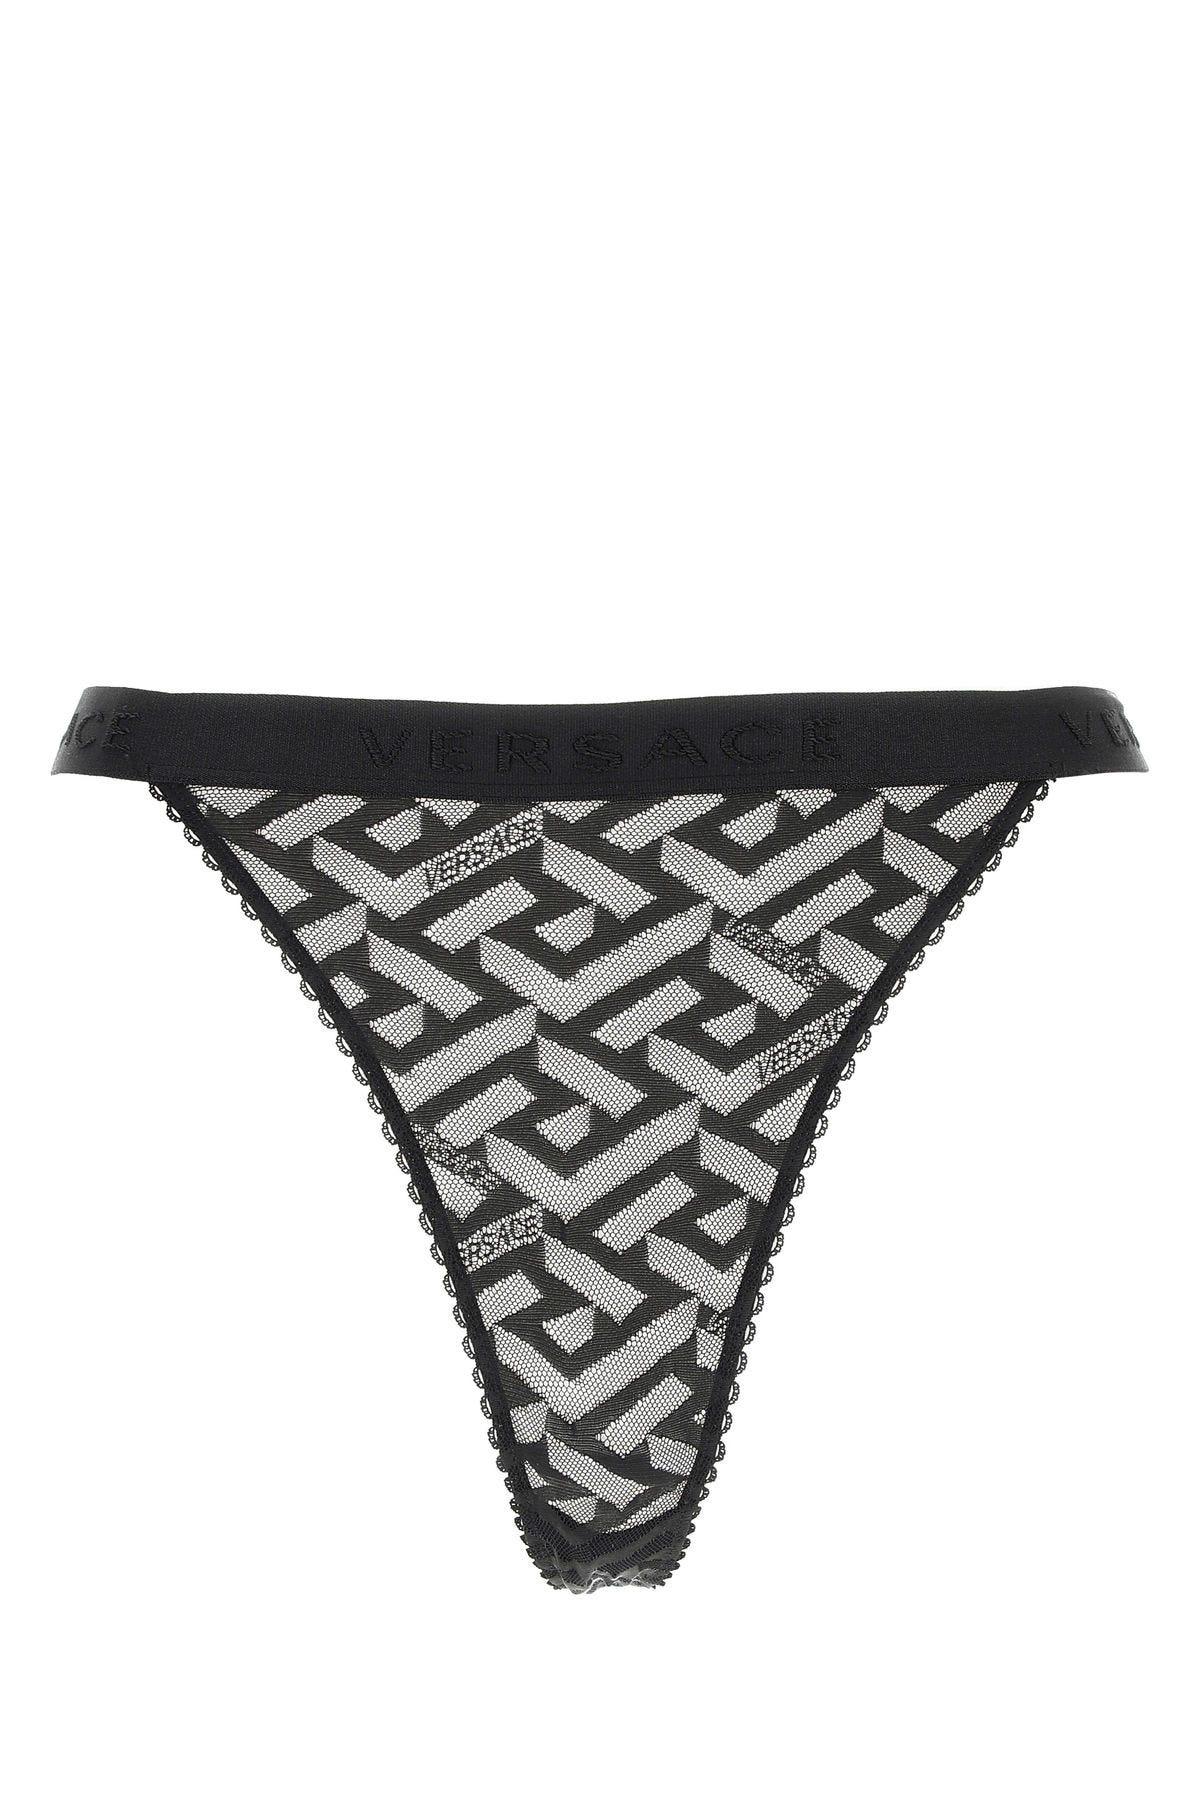 Versace Black Stretch Lace Thong